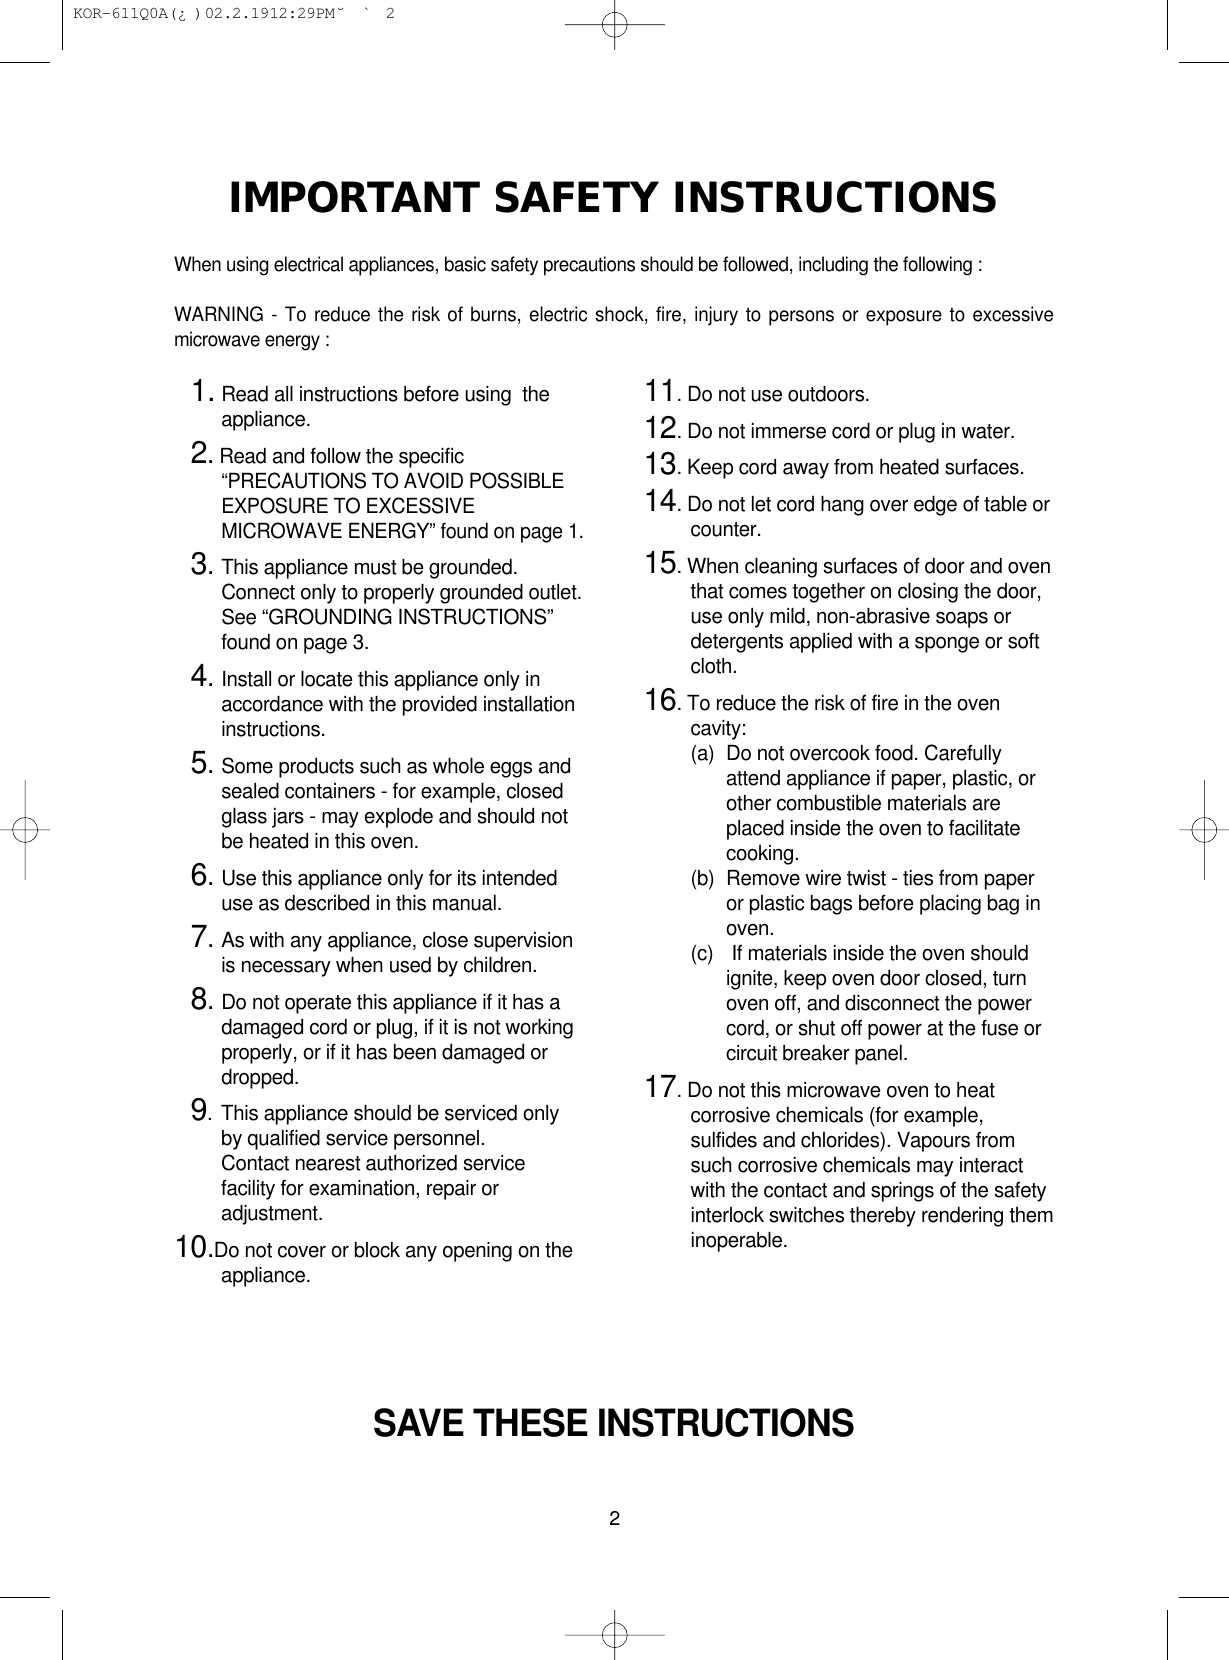 2IMPORTANT SAFETY INSTRUCTIONSWhen using electrical appliances, basic safety precautions should be followed, including the following : WARNING - To reduce the risk of burns, electric shock, fire, injury to persons or exposure to excessivemicrowave energy : SAVE THESE INSTRUCTIONS11. Read all instructions before using  theappliance.12.Read and follow the specific“PRECAUTIONS TO AVOID POSSIBLEEXPOSURE TO EXCESSIVEMICROWAVE ENERGY” found on page 1.13.This appliance must be grounded.Connect only to properly grounded outlet.See “GROUNDING INSTRUCTIONS”found on page 3.14.Install or locate this appliance only inaccordance with the provided installationinstructions.15.Some products such as whole eggs andsealed containers - for example, closedglass jars - may explode and should notbe heated in this oven.16.Use this appliance only for its intendeduse as described in this manual.17.As with any appliance, close supervisionis necessary when used by children.18.Do not operate this appliance if it has adamaged cord or plug, if it is not workingproperly, or if it has been damaged ordropped.19. This appliance should be serviced onlyby qualified service personnel.Contact nearest authorized servicefacility for examination, repair oradjustment.10.Do not cover or block any opening on theappliance.11. Do not use outdoors.12. Do not immerse cord or plug in water.13. Keep cord away from heated surfaces.14. Do not let cord hang over edge of table orcounter.15. When cleaning surfaces of door and oventhat comes together on closing the door,use only mild, non-abrasive soaps ordetergents applied with a sponge or softcloth.16. To reduce the risk of fire in the ovencavity:(a)  Do not overcook food. Carefullyattend appliance if paper, plastic, orother combustible materials areplaced inside the oven to facilitatecooking.(b)  Remove wire twist - ties from paperor plastic bags before placing bag inoven.(c) If materials inside the oven shouldignite, keep oven door closed, turnoven off, and disconnect the powercord, or shut off power at the fuse orcircuit breaker panel.17. Do not this microwave oven to heatcorrosive chemicals (for example,sulfides and chlorides). Vapours fromsuch corrosive chemicals may interactwith the contact and springs of the safetyinterlock switches thereby rendering theminoperable. KOR-611Q0A(¿ )  02.2.19 12:29 PM  ˘`2